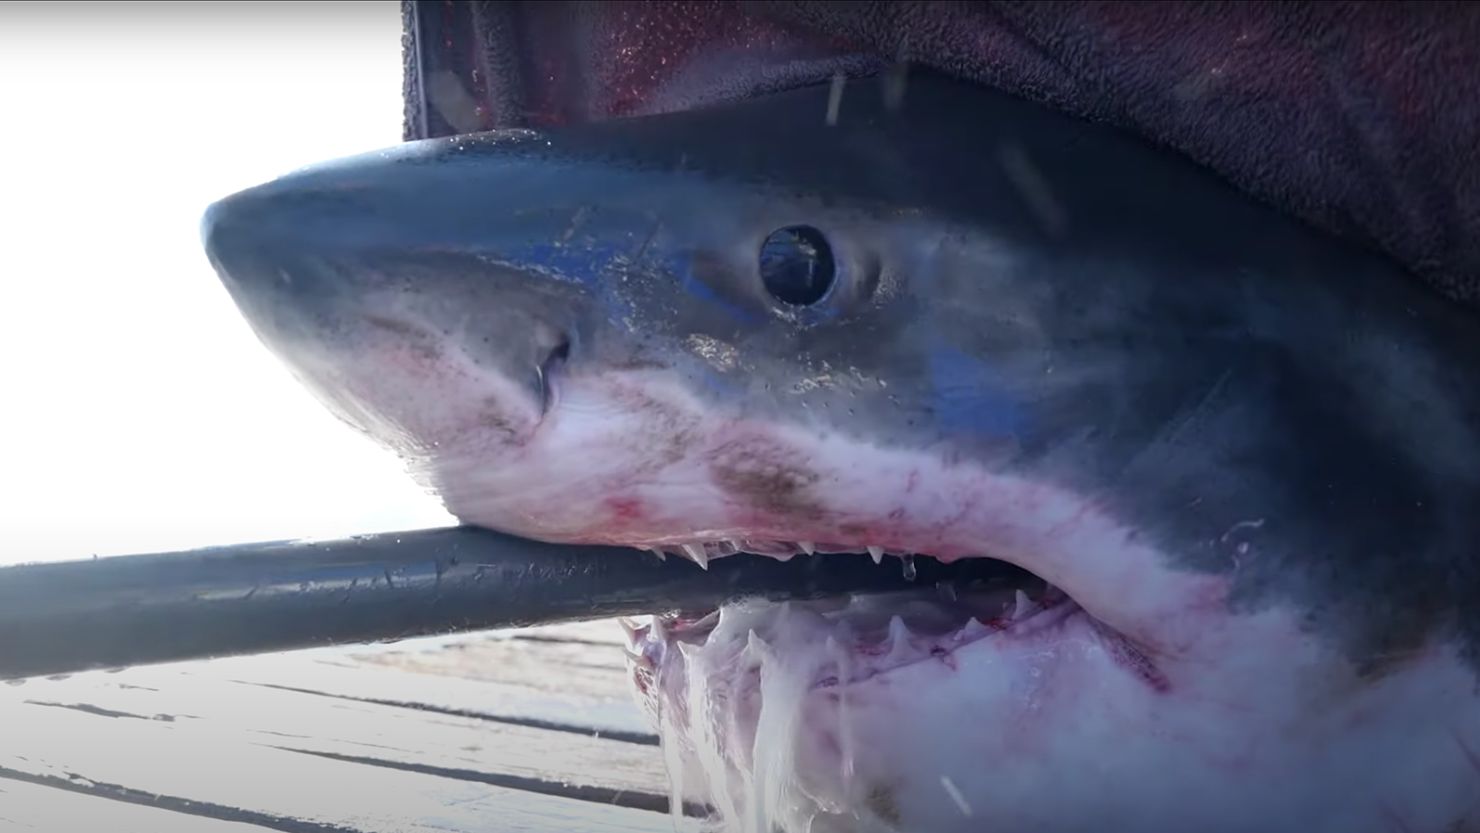 Meet Scot, the 1,600-pound great white shark swimming off Florida's coast